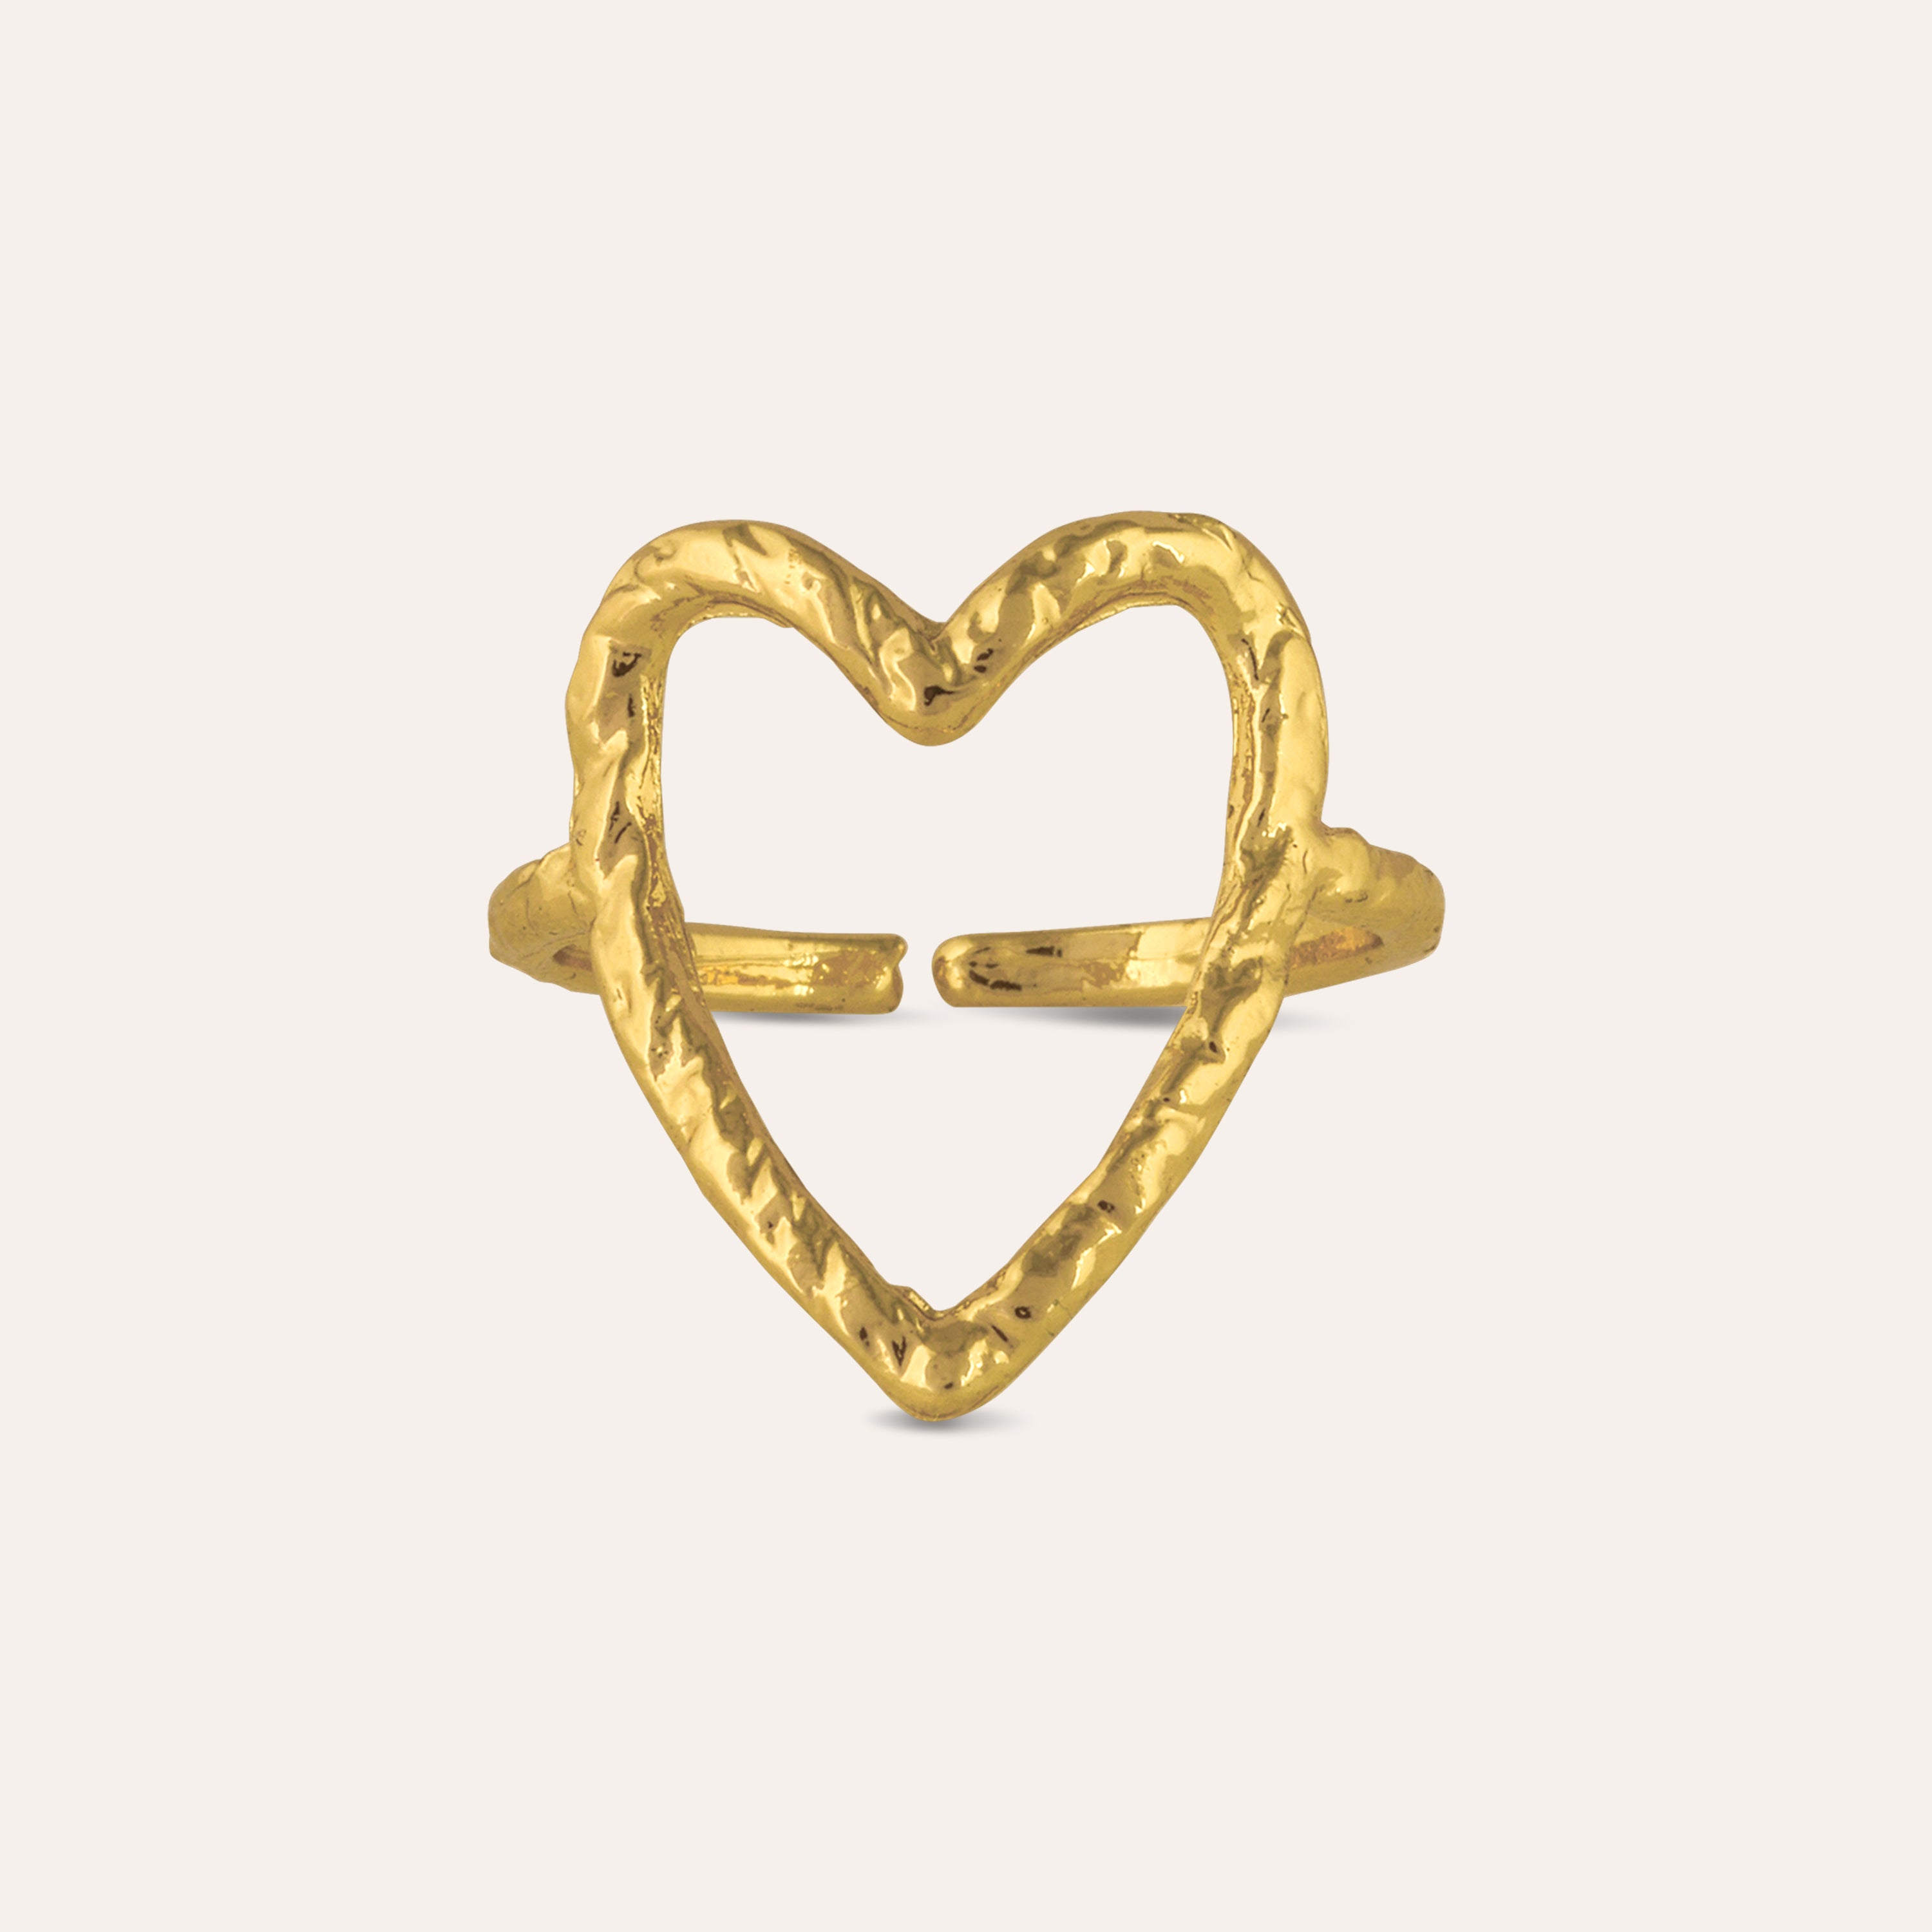 TFC Darling Love Gold Plated Adjustable Ring